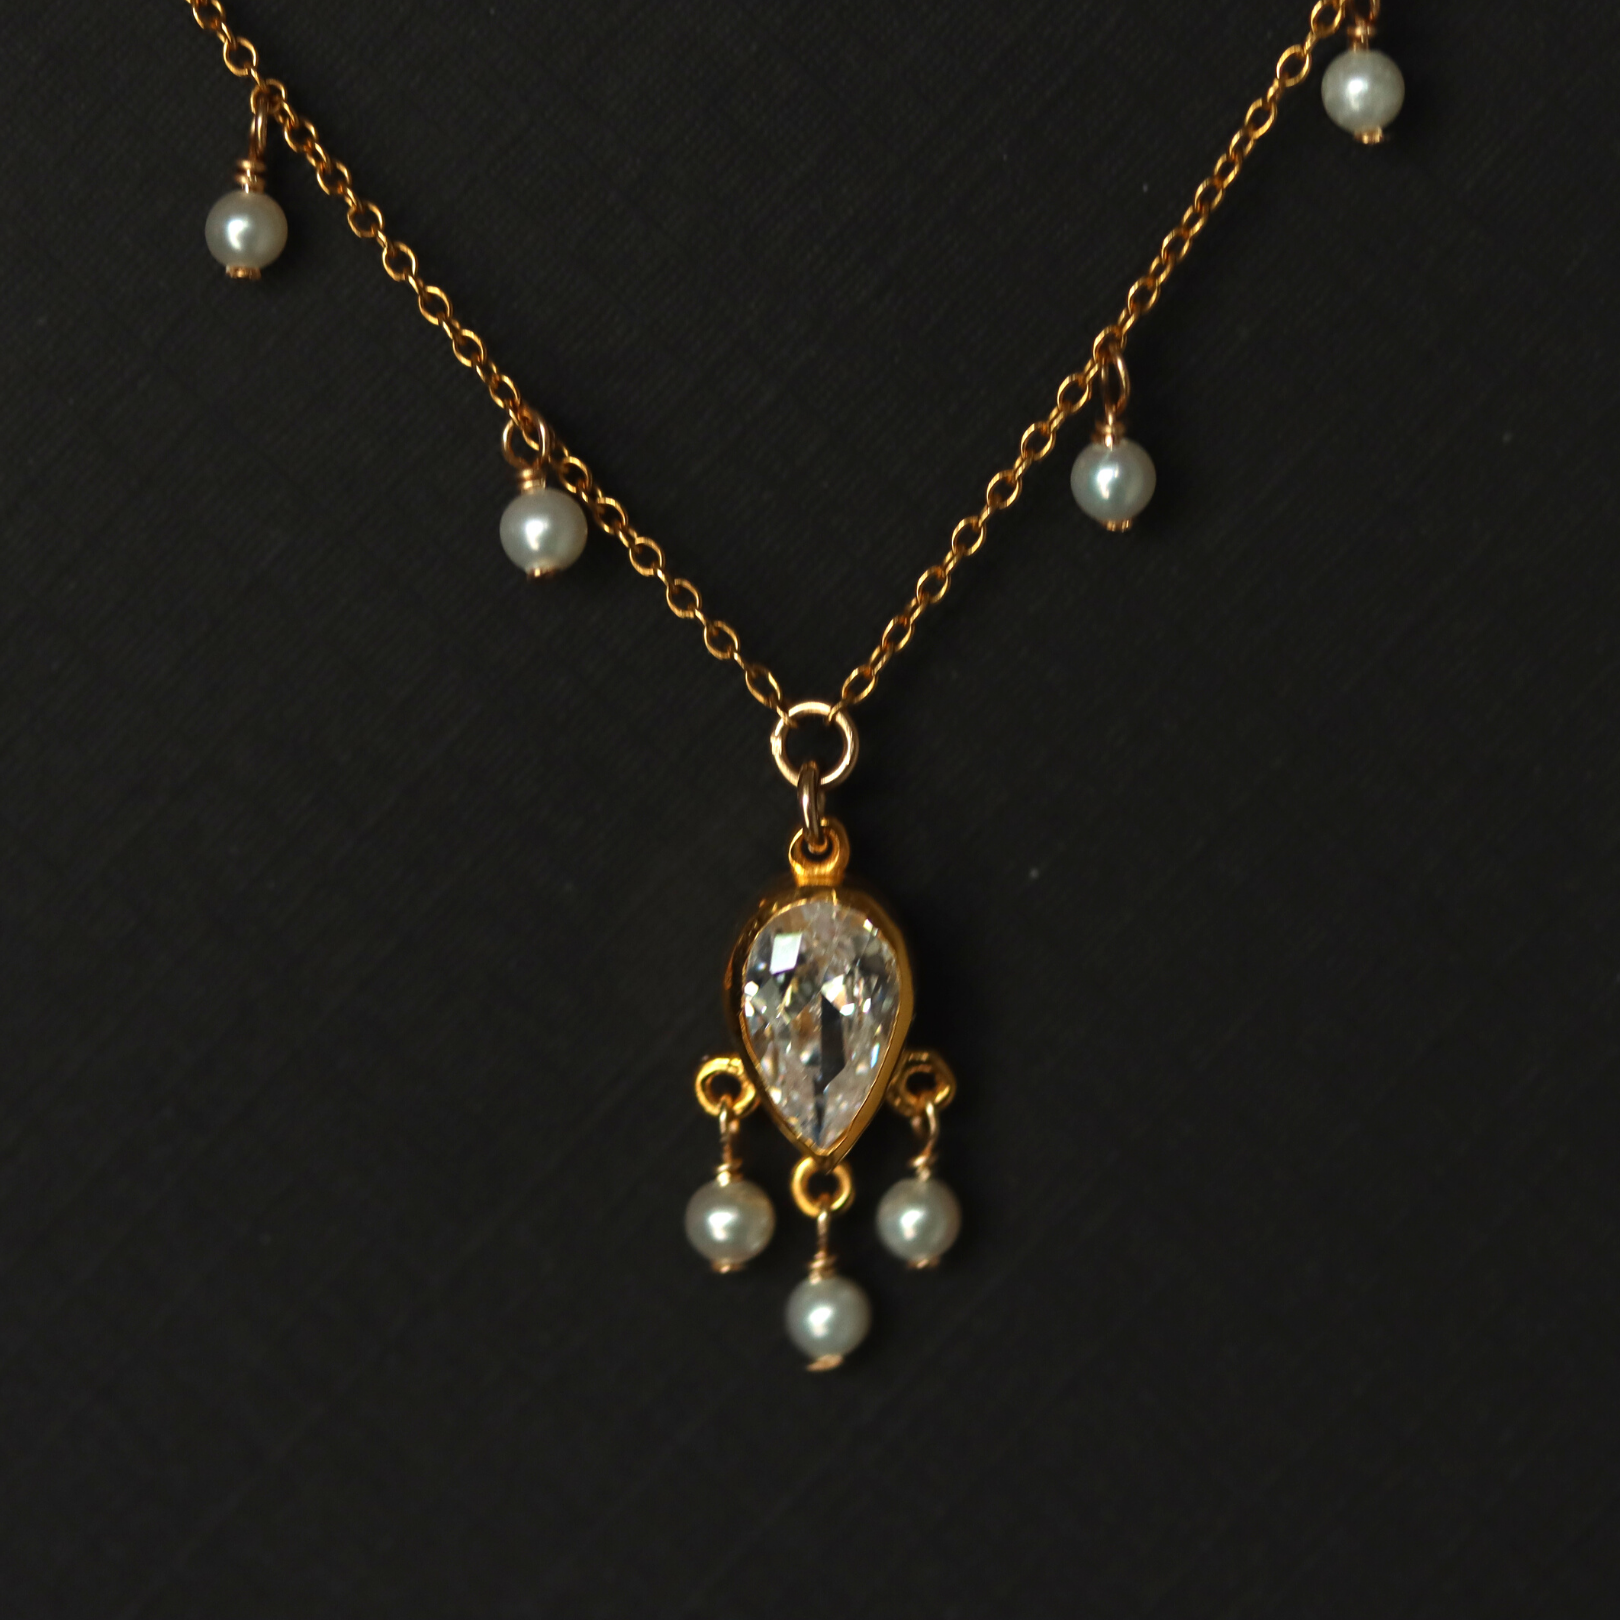 Teardrop necklace with seed pearls